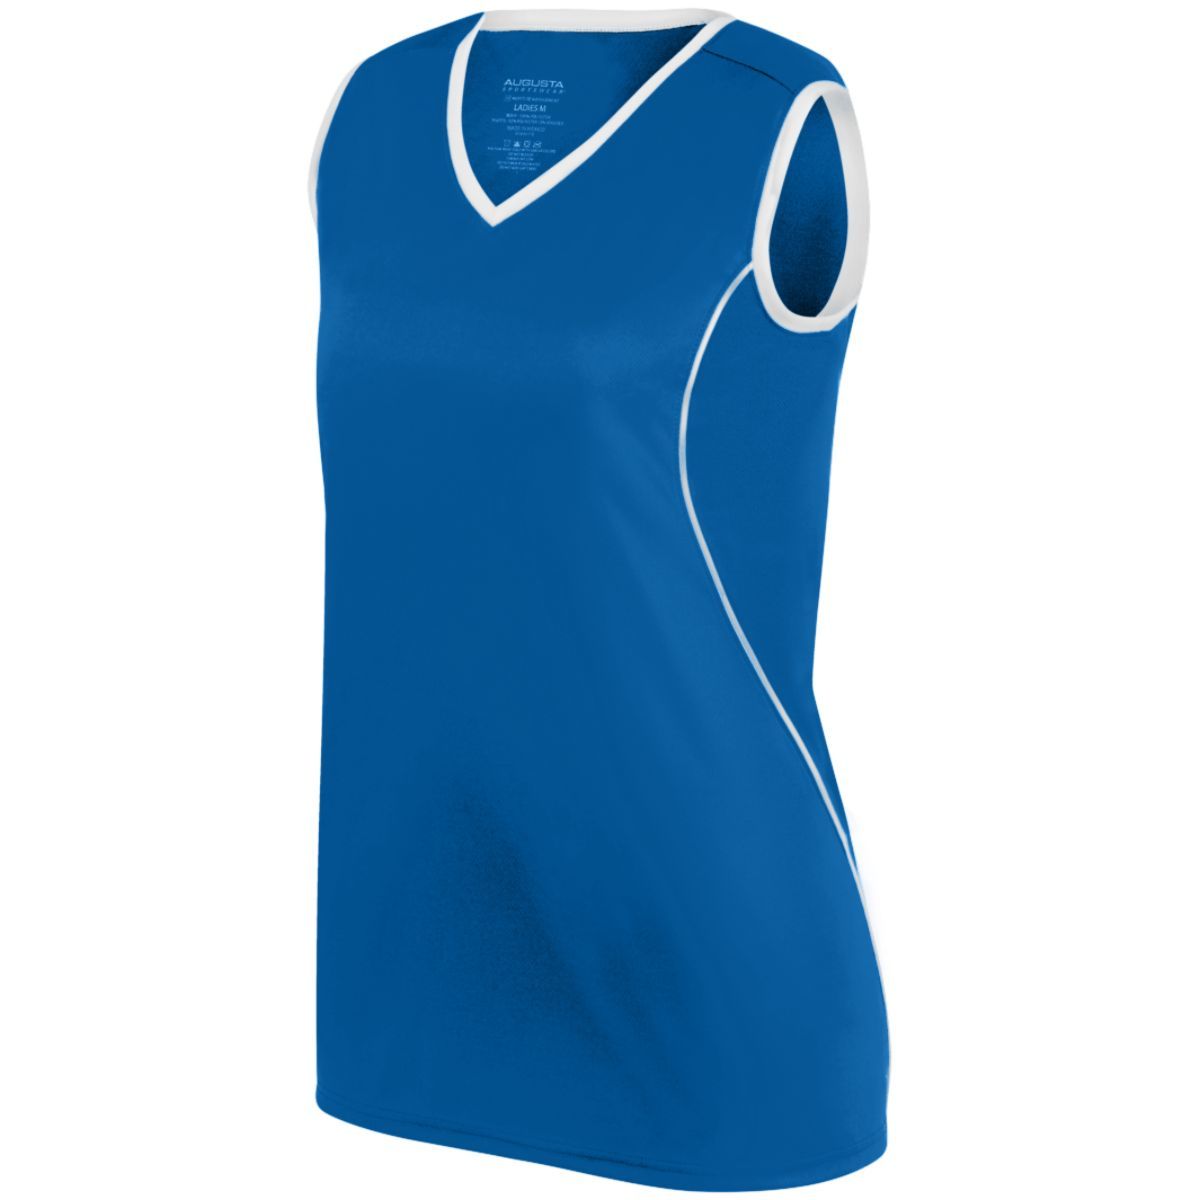 Augusta Sportswear Ladies Firebolt Jersey in Royal/White  -Part of the Ladies, Ladies-Jersey, Augusta-Products, Softball, Shirts product lines at KanaleyCreations.com